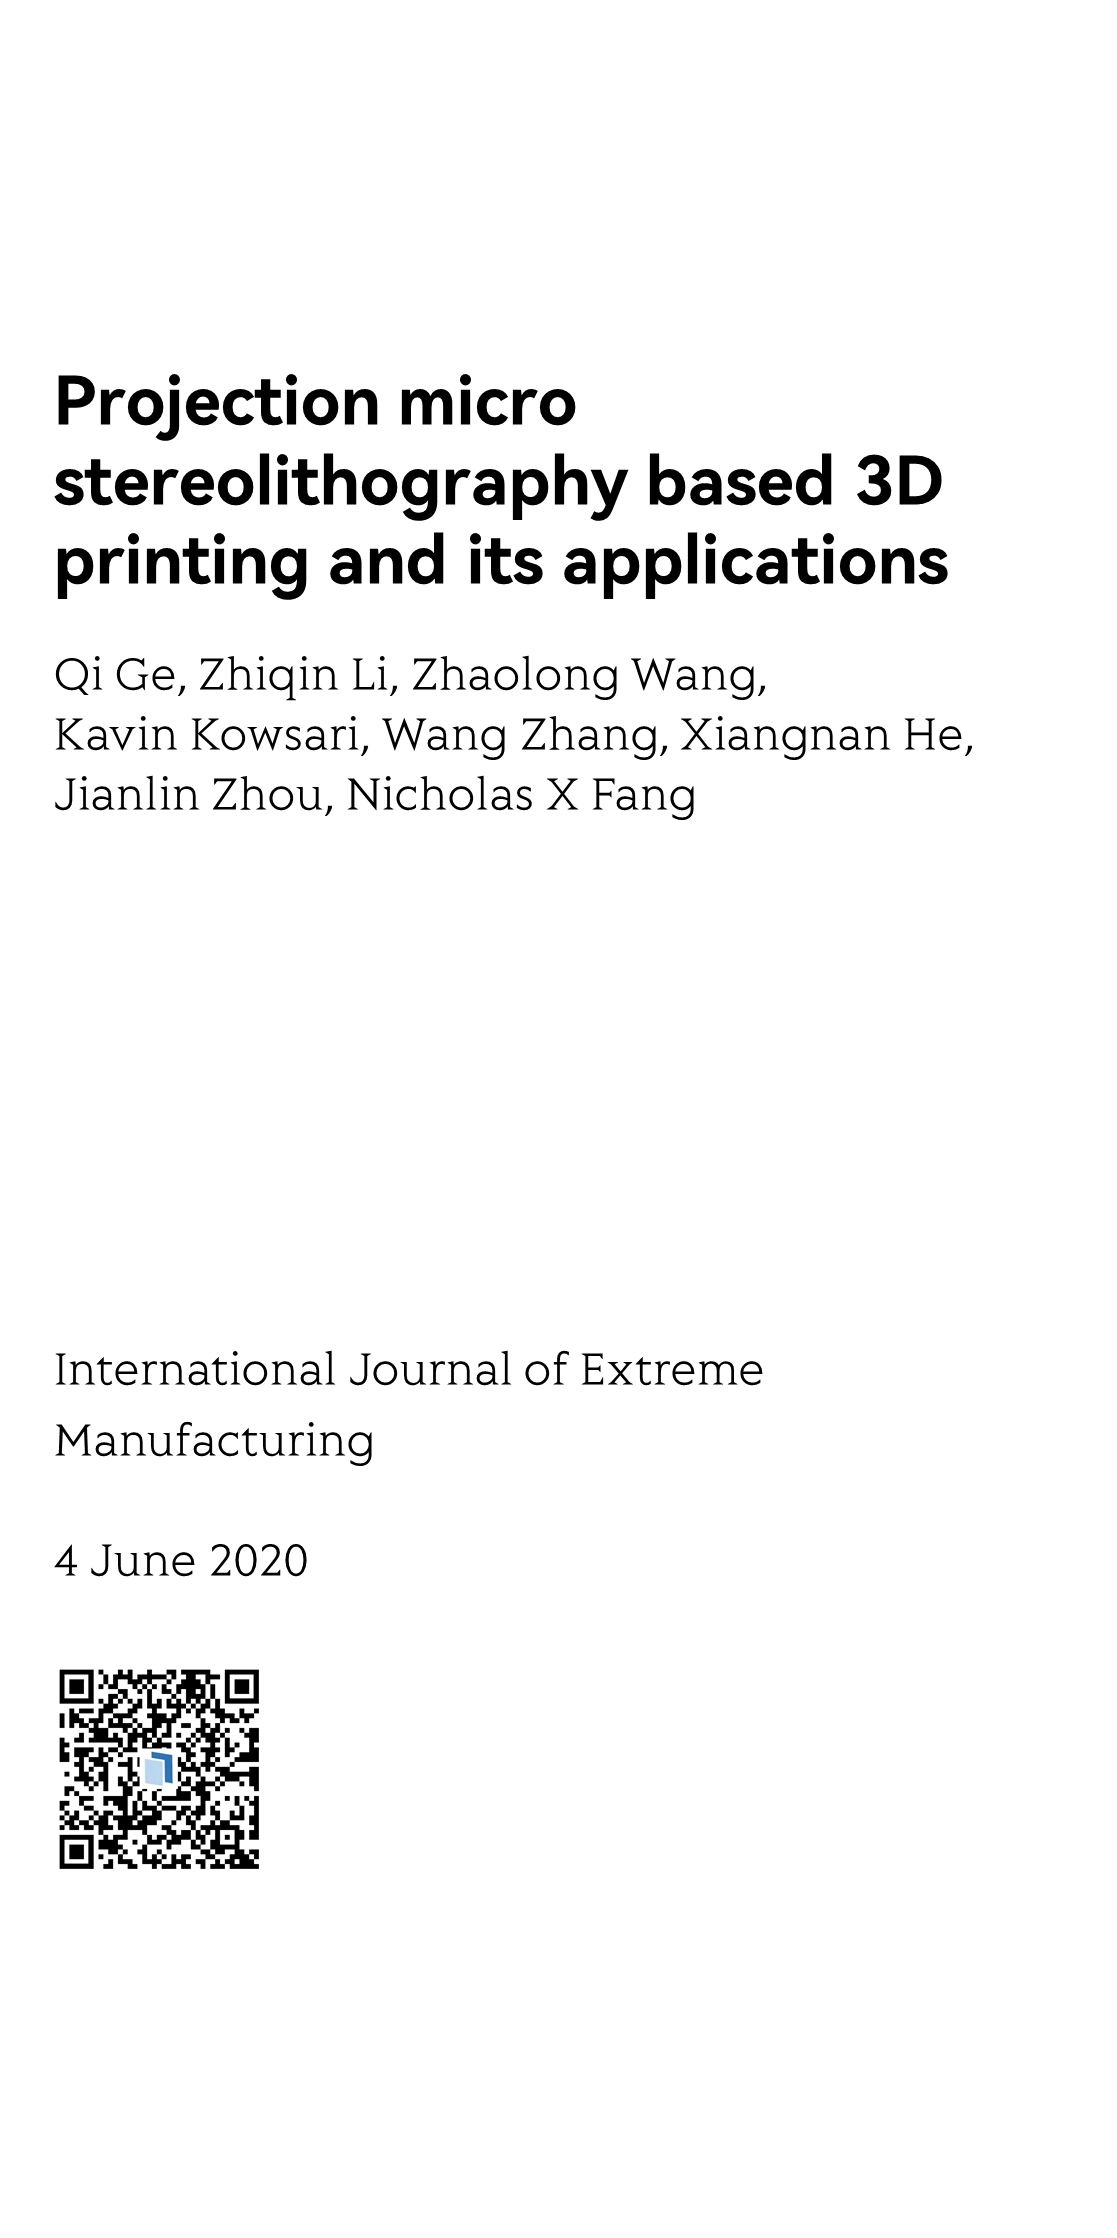 Projection micro stereolithography based 3D printing and its applications_1